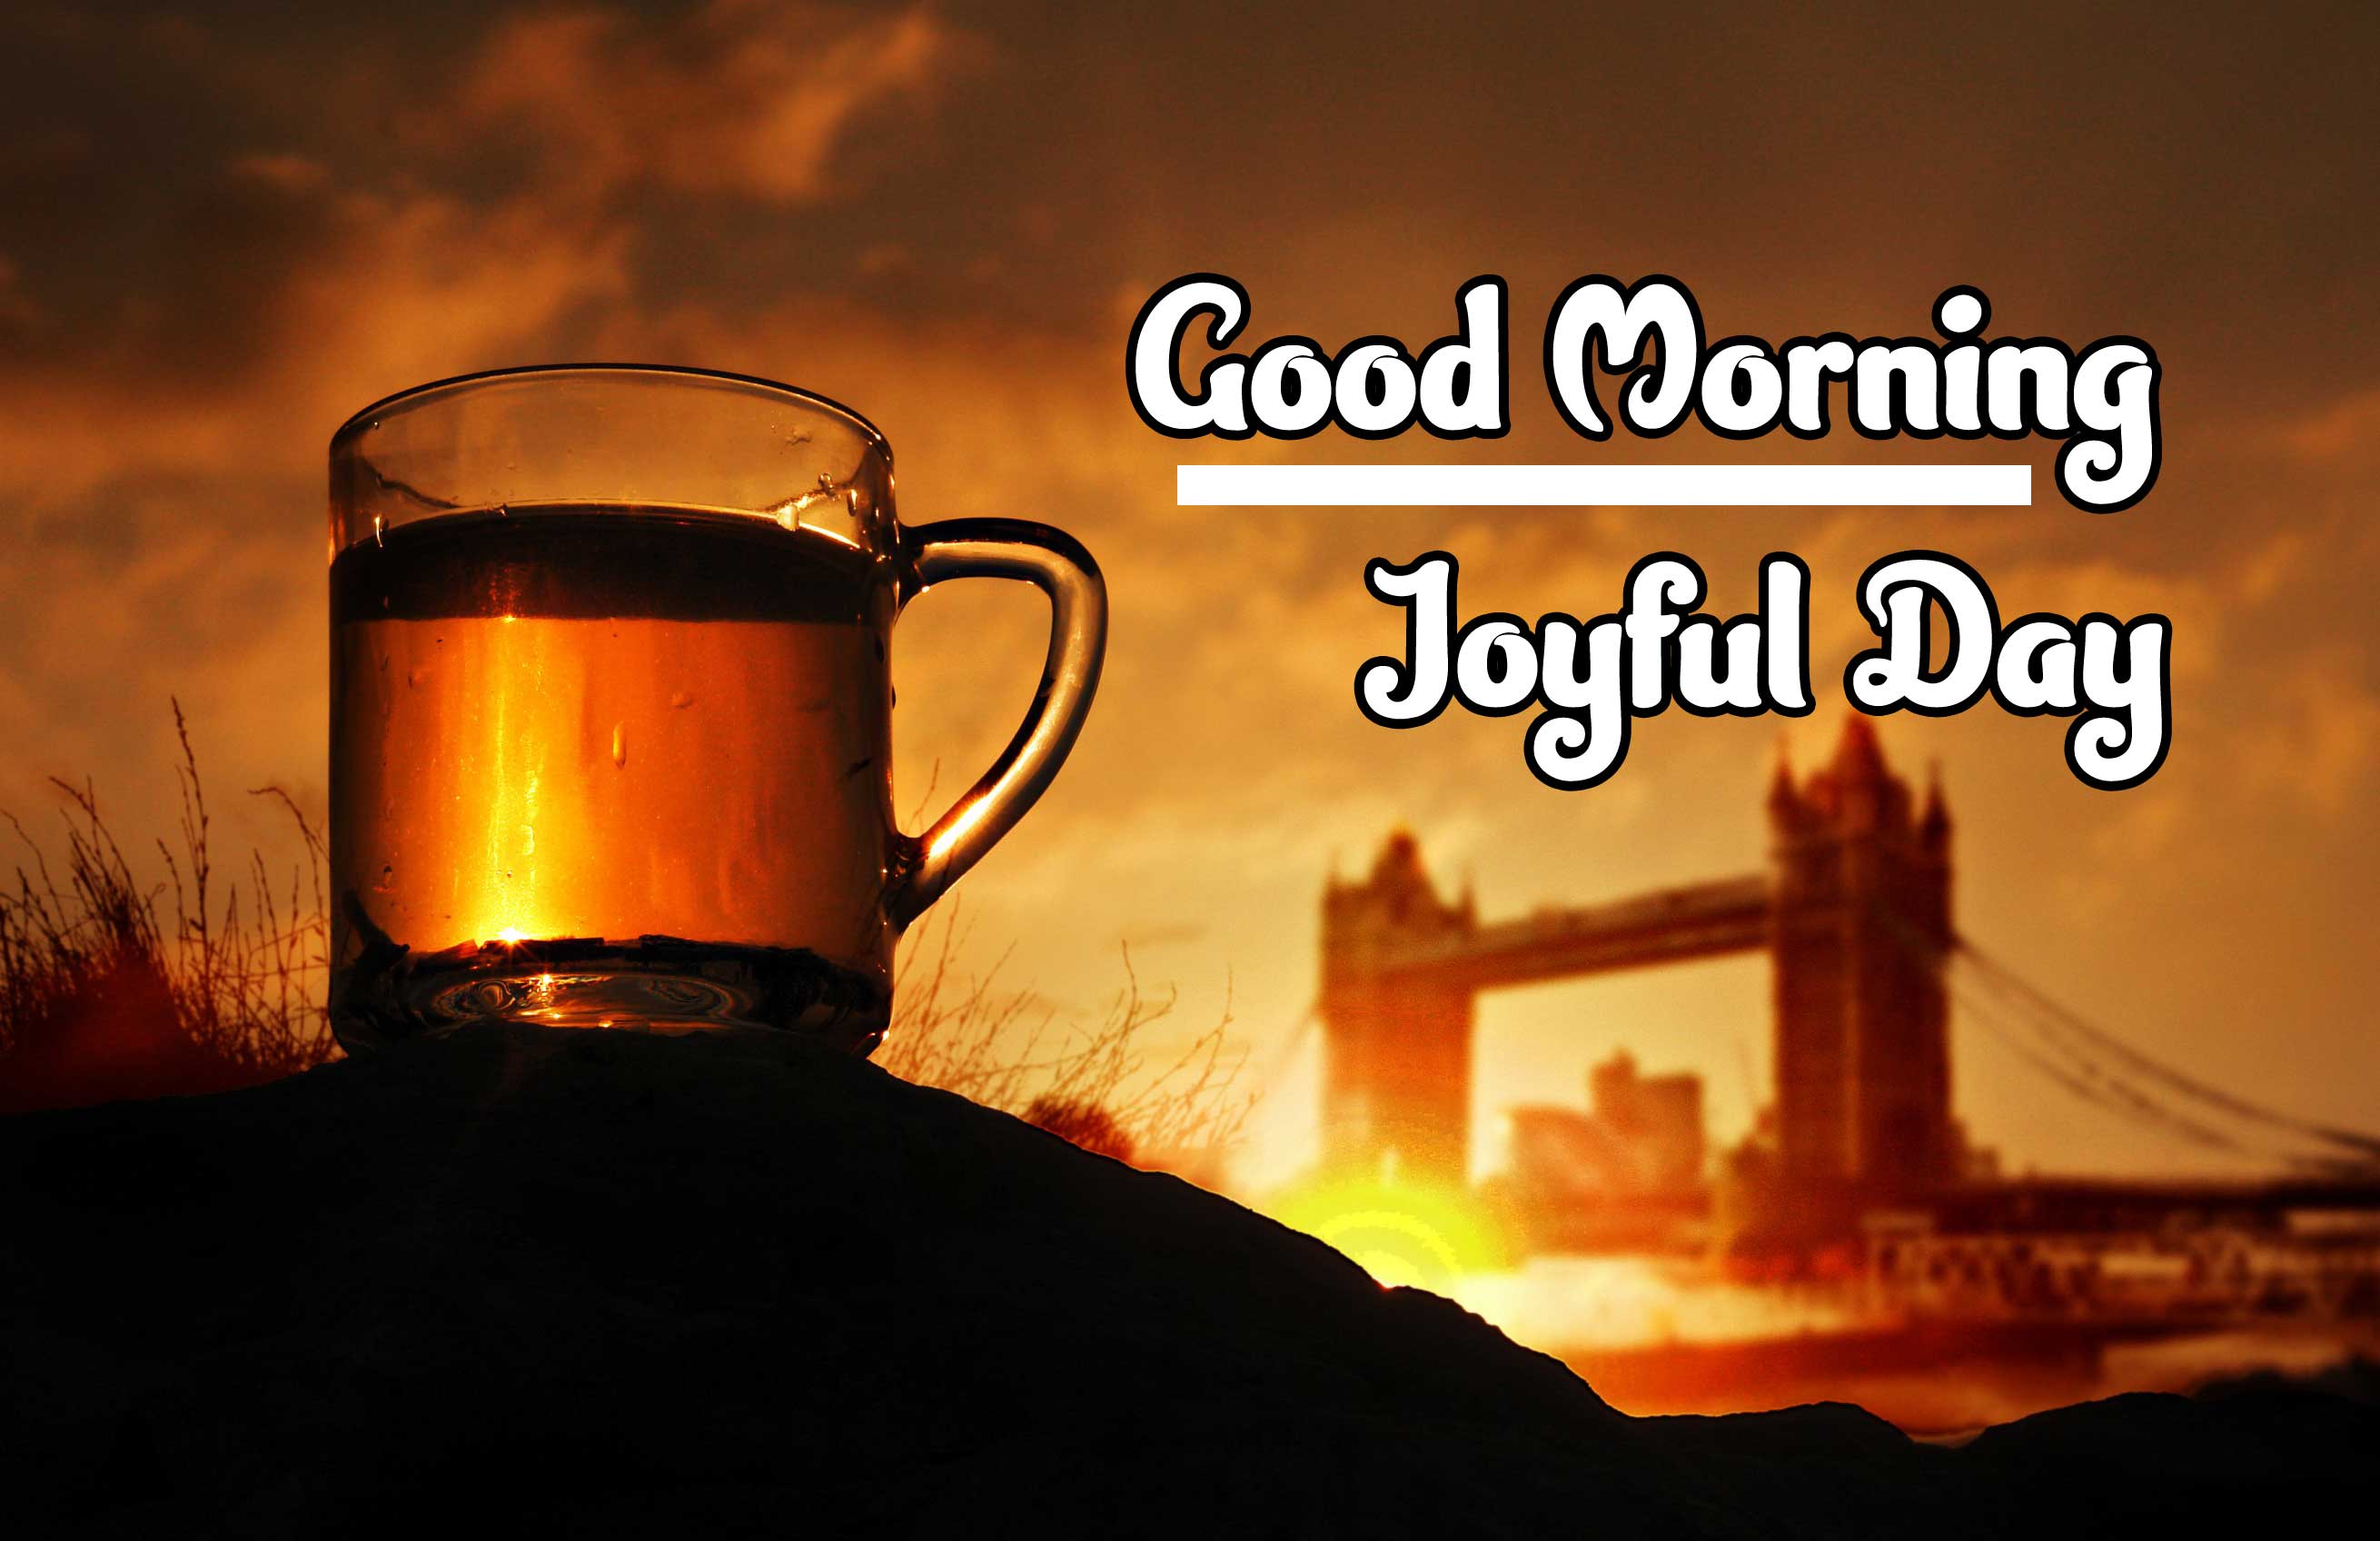 Good Morning Wishes Images 4K 1080p photo Free Download 